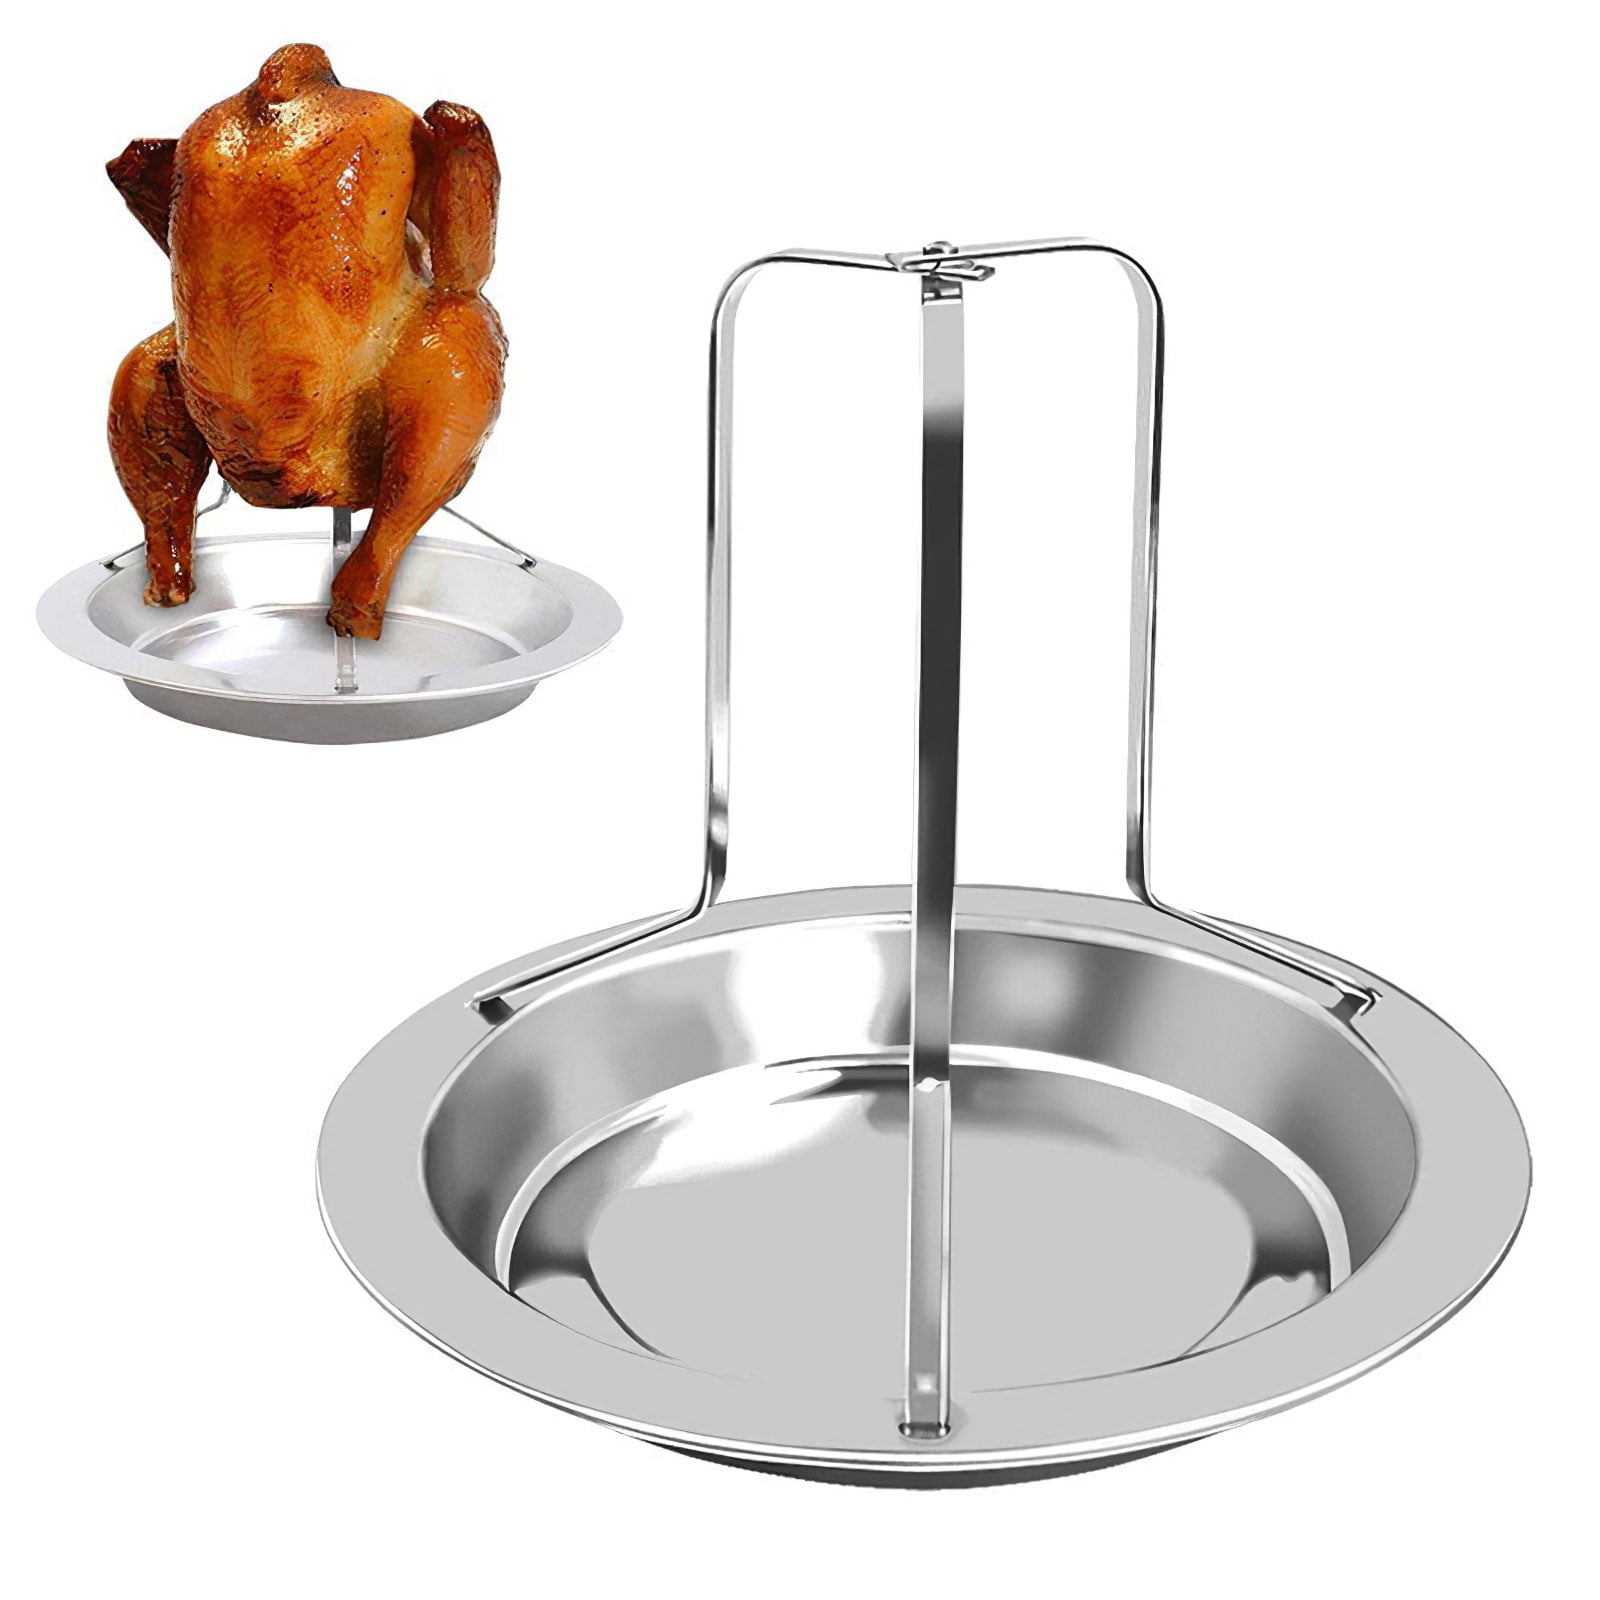 Chicken Roaster Rack Stainless Steel Beer Can Holder Stand Pan Grill Oven BBQ 